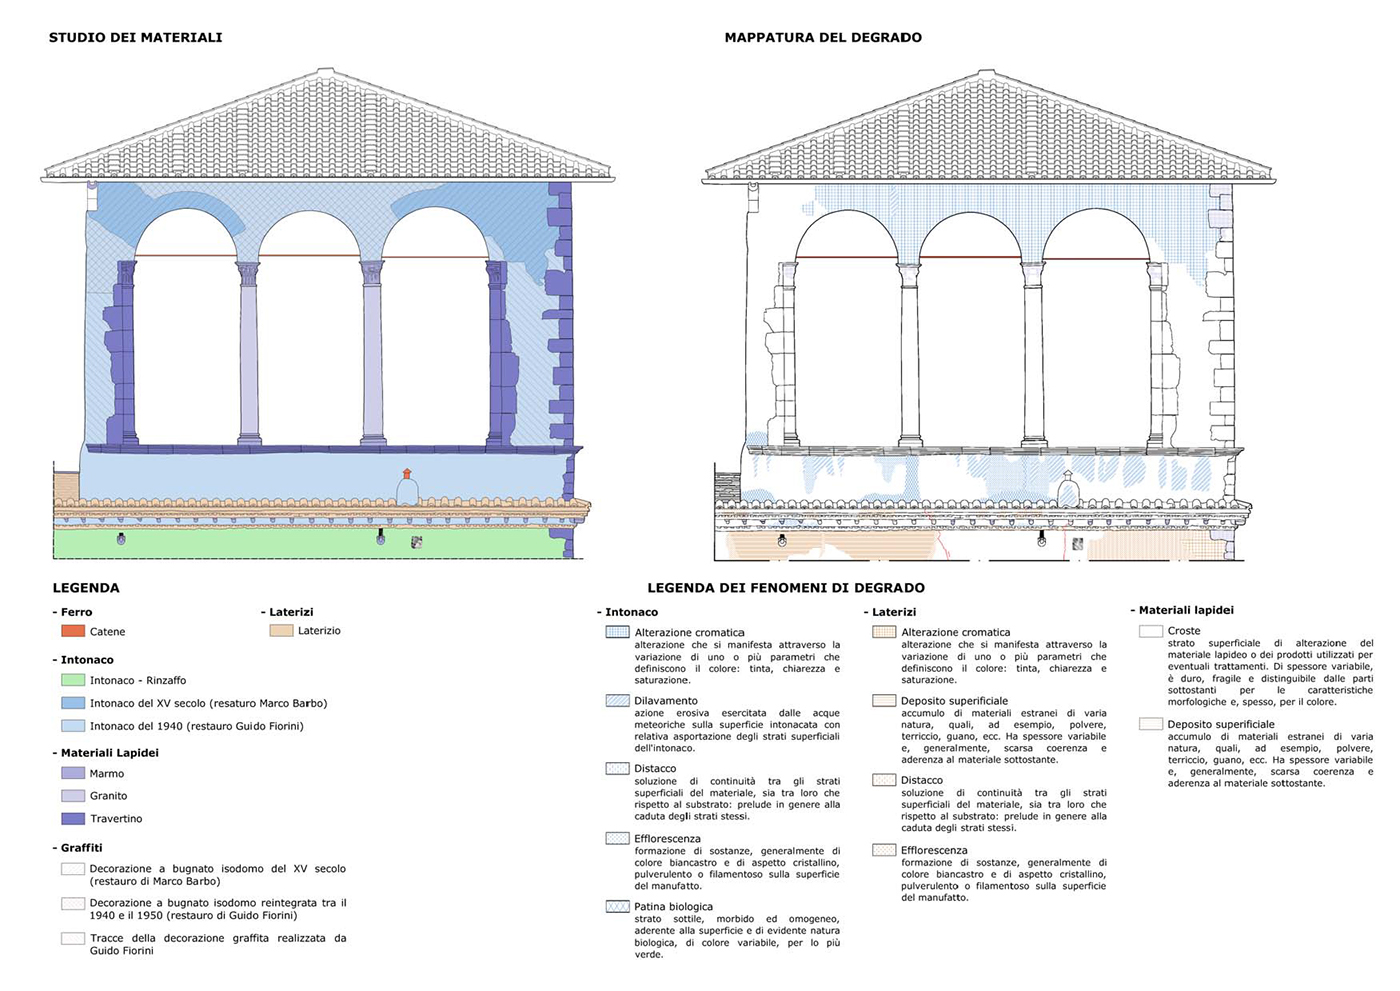 architectural survey design Rome Drawing  Historical Architecture lodge cultural heritage Mapping restoration restauro